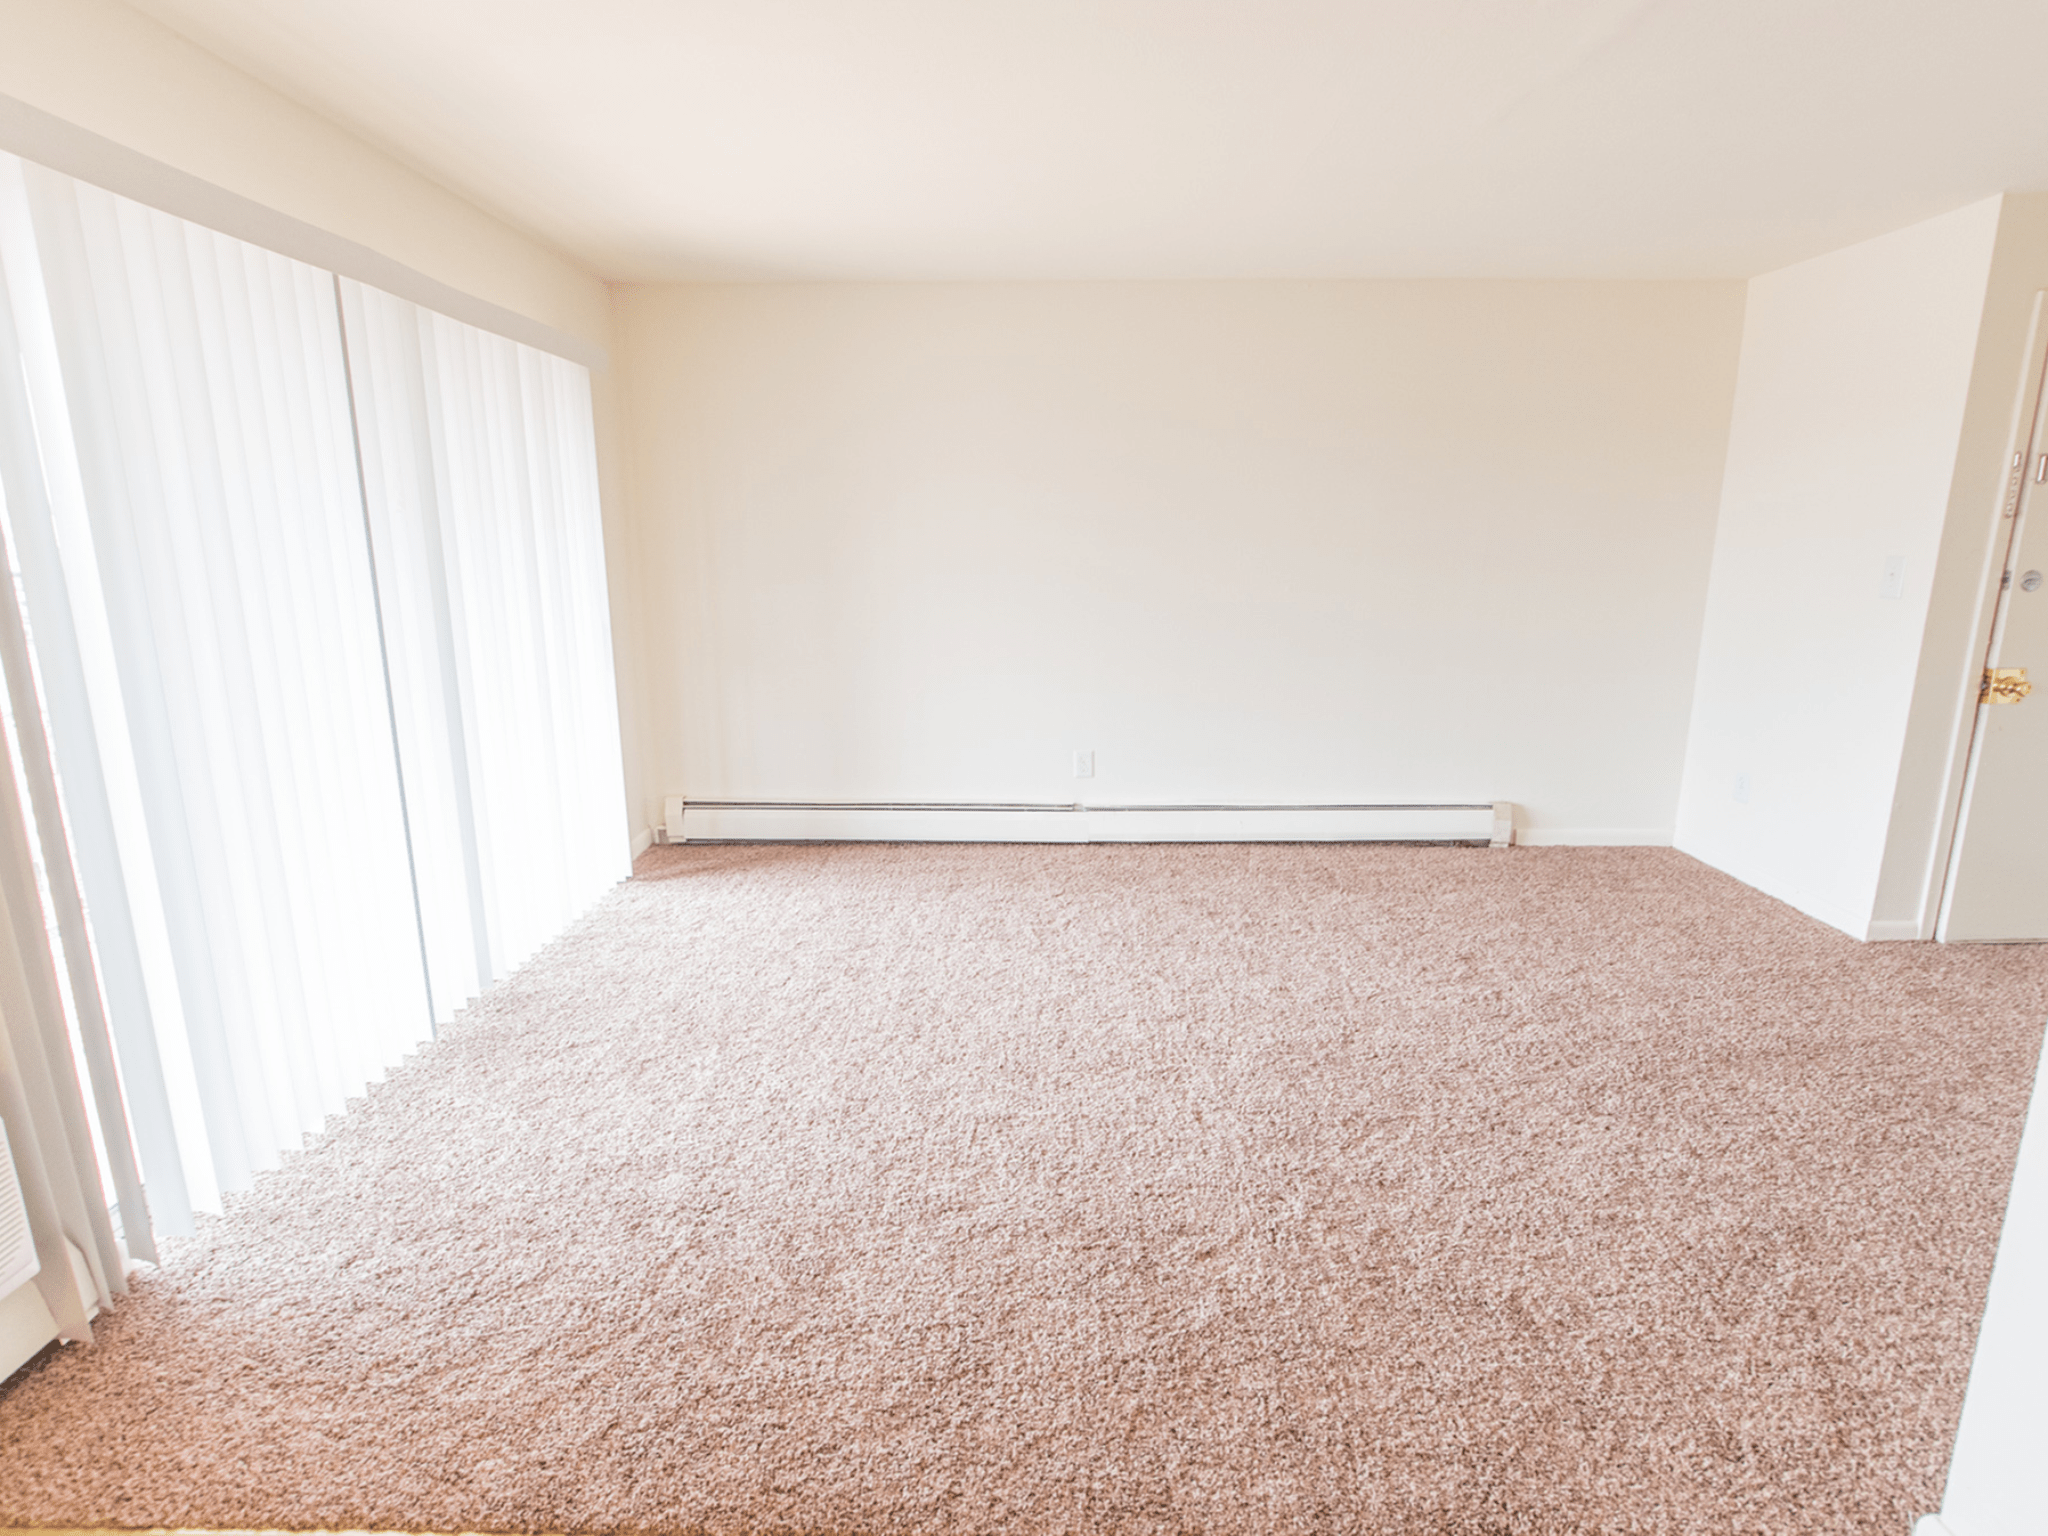 Polo Ridge apartments with carpeted flooring and heating in the living room with sliding doors leading to balcony